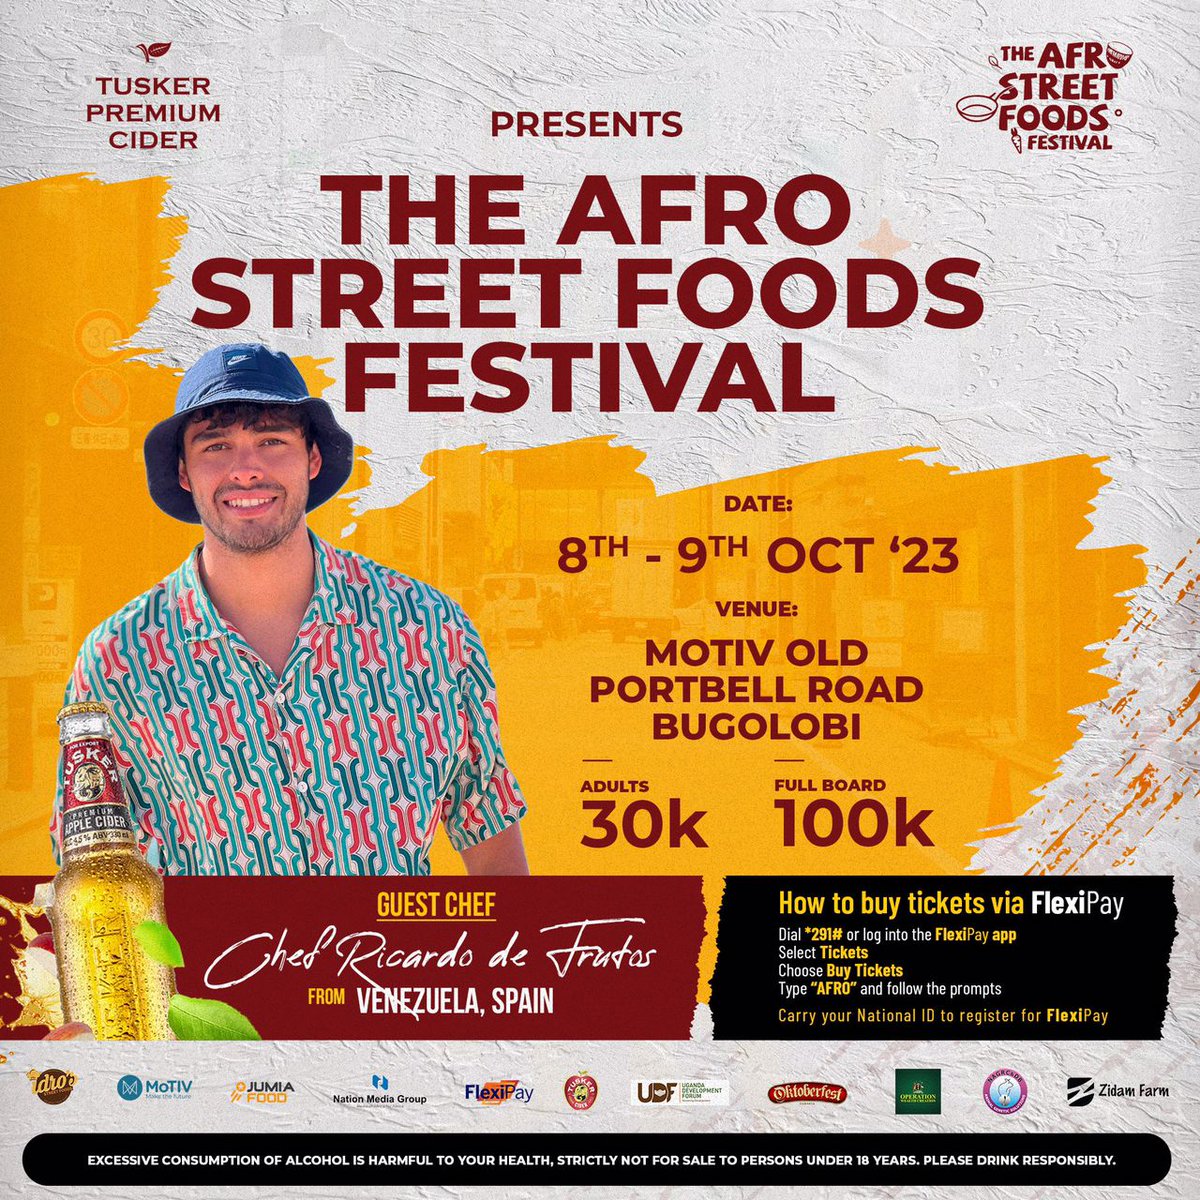 Today at 5pm, the journey to the #AfroStreetFoodFestival leads us to the Jumia Ntinda Offices for an exciting @IdrosStreetFood's #PopUpKitchen event. 

Entry is free plus loads of entertainment and enjoyment! 🥘🍻🎉

Powered by @tuskerciderug